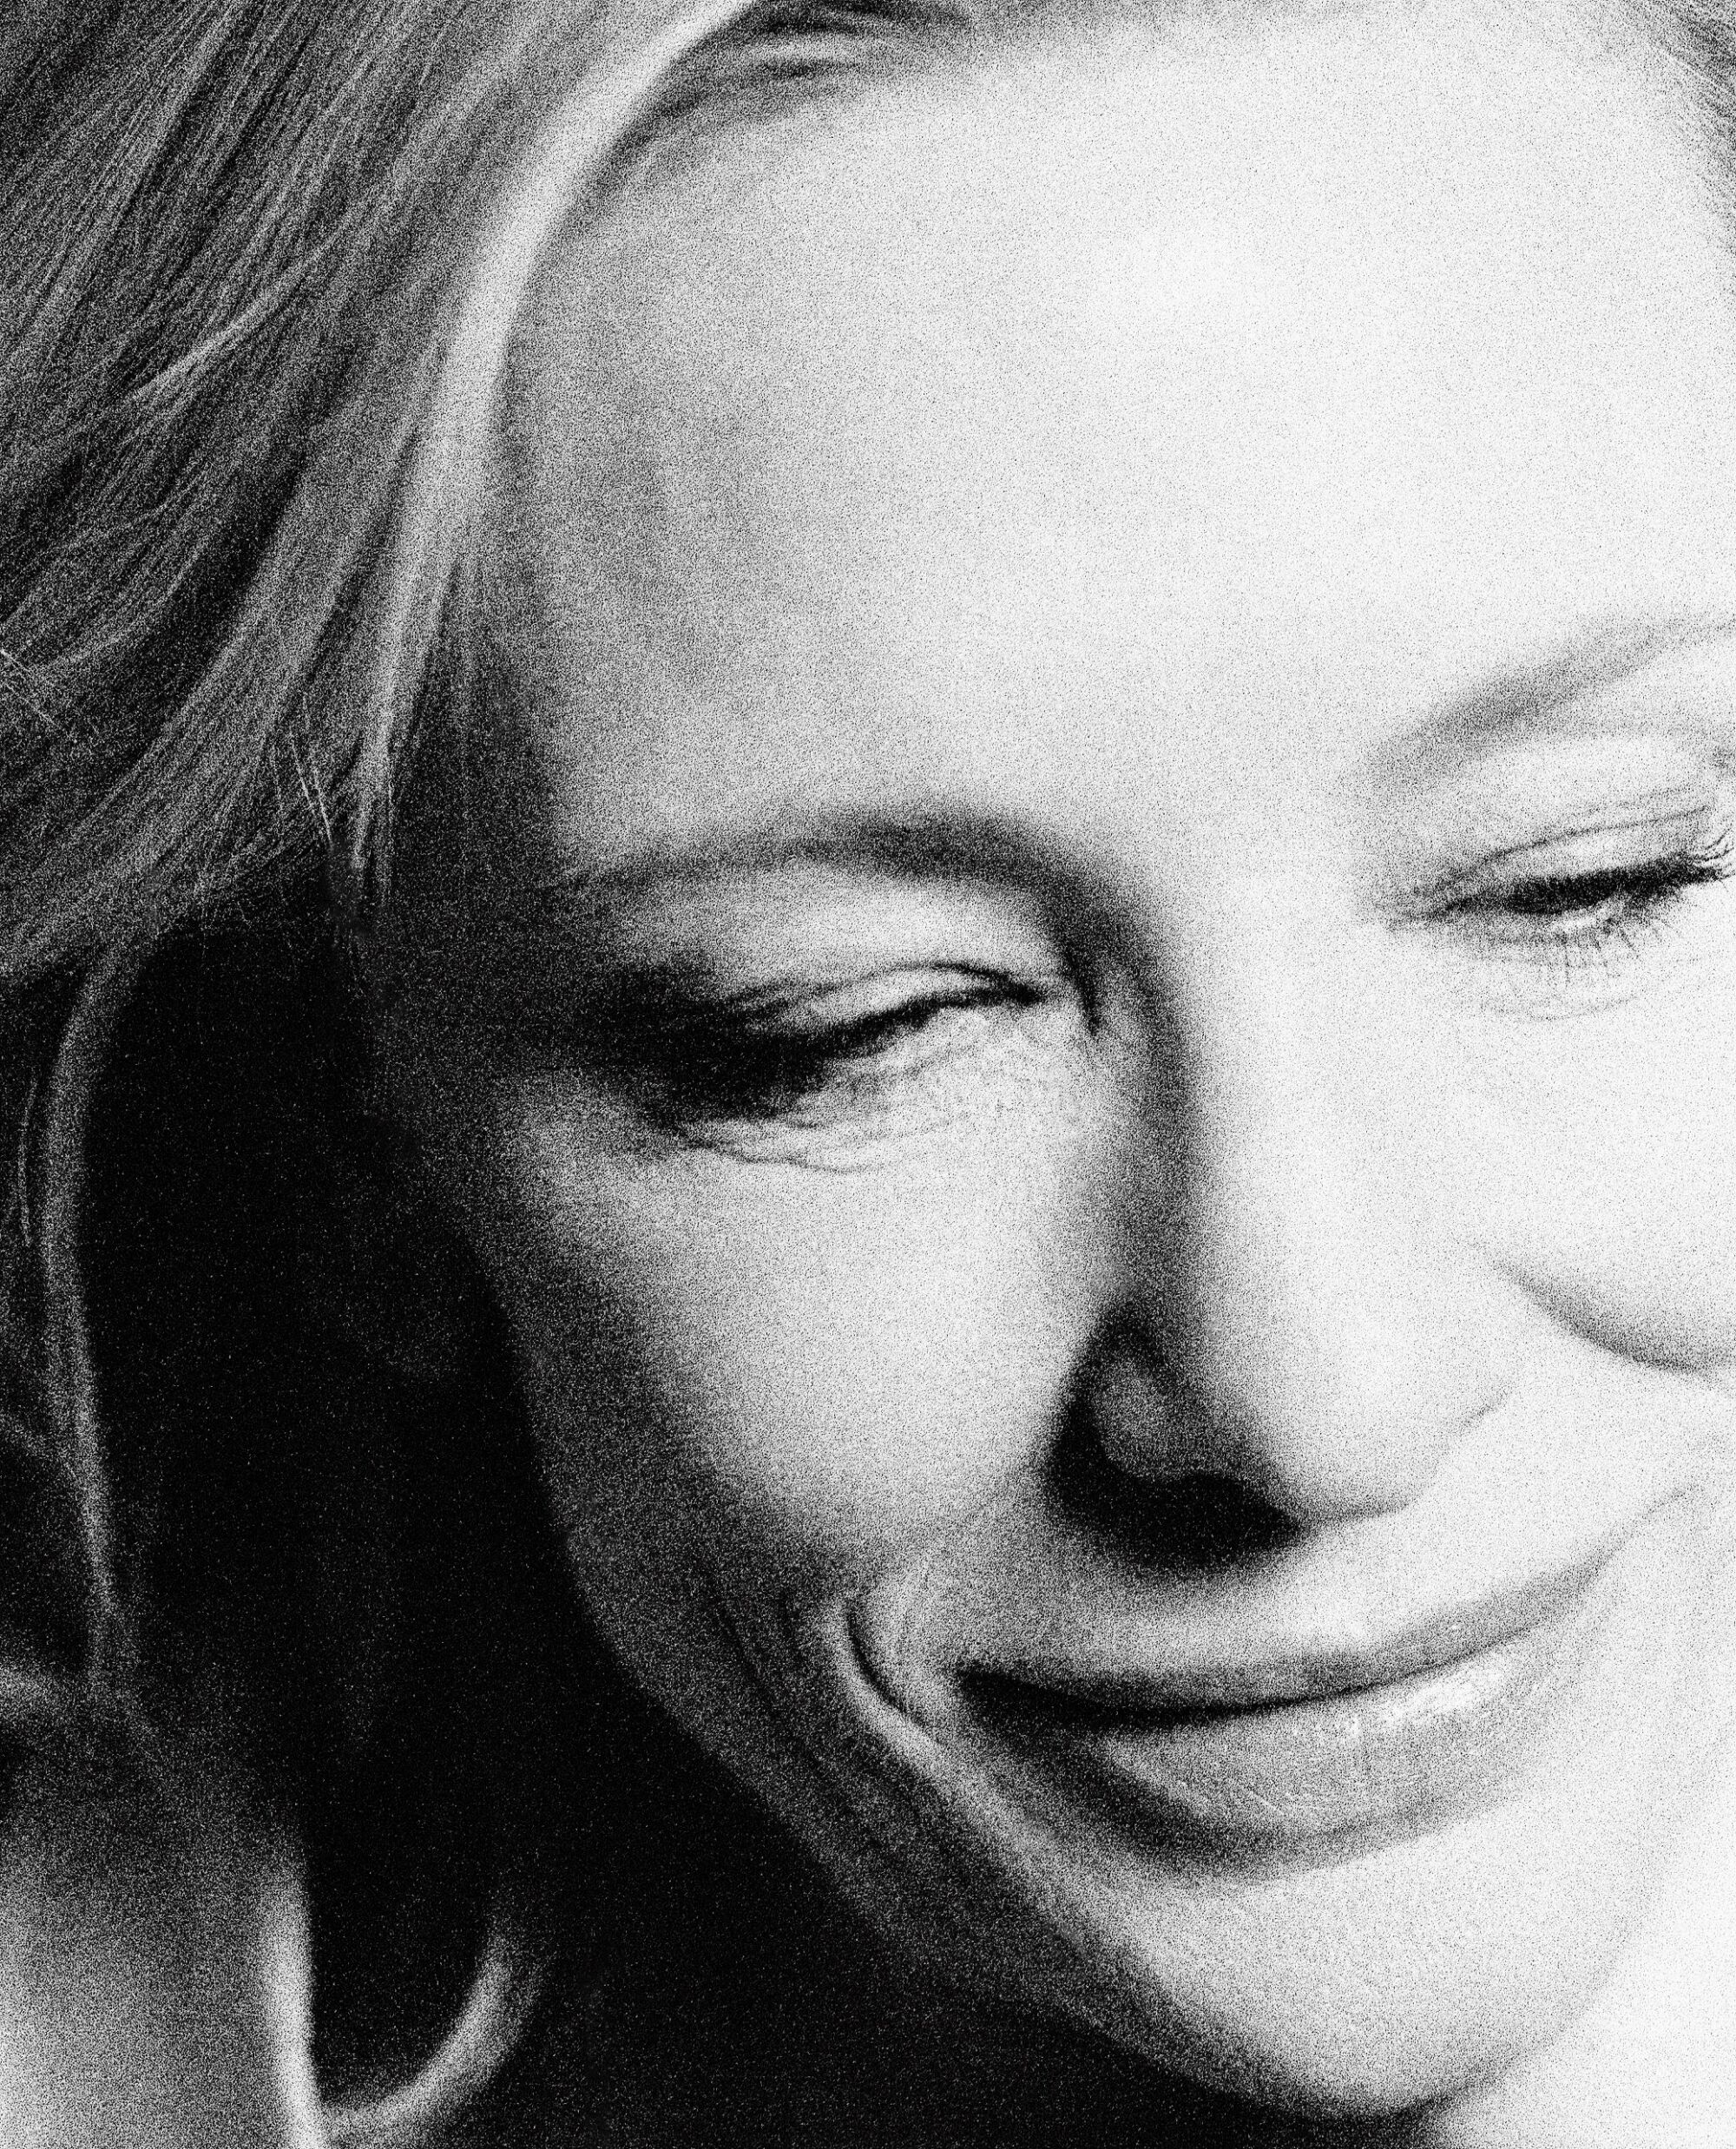 A black and white tight shot of Cate Blanchett's face.